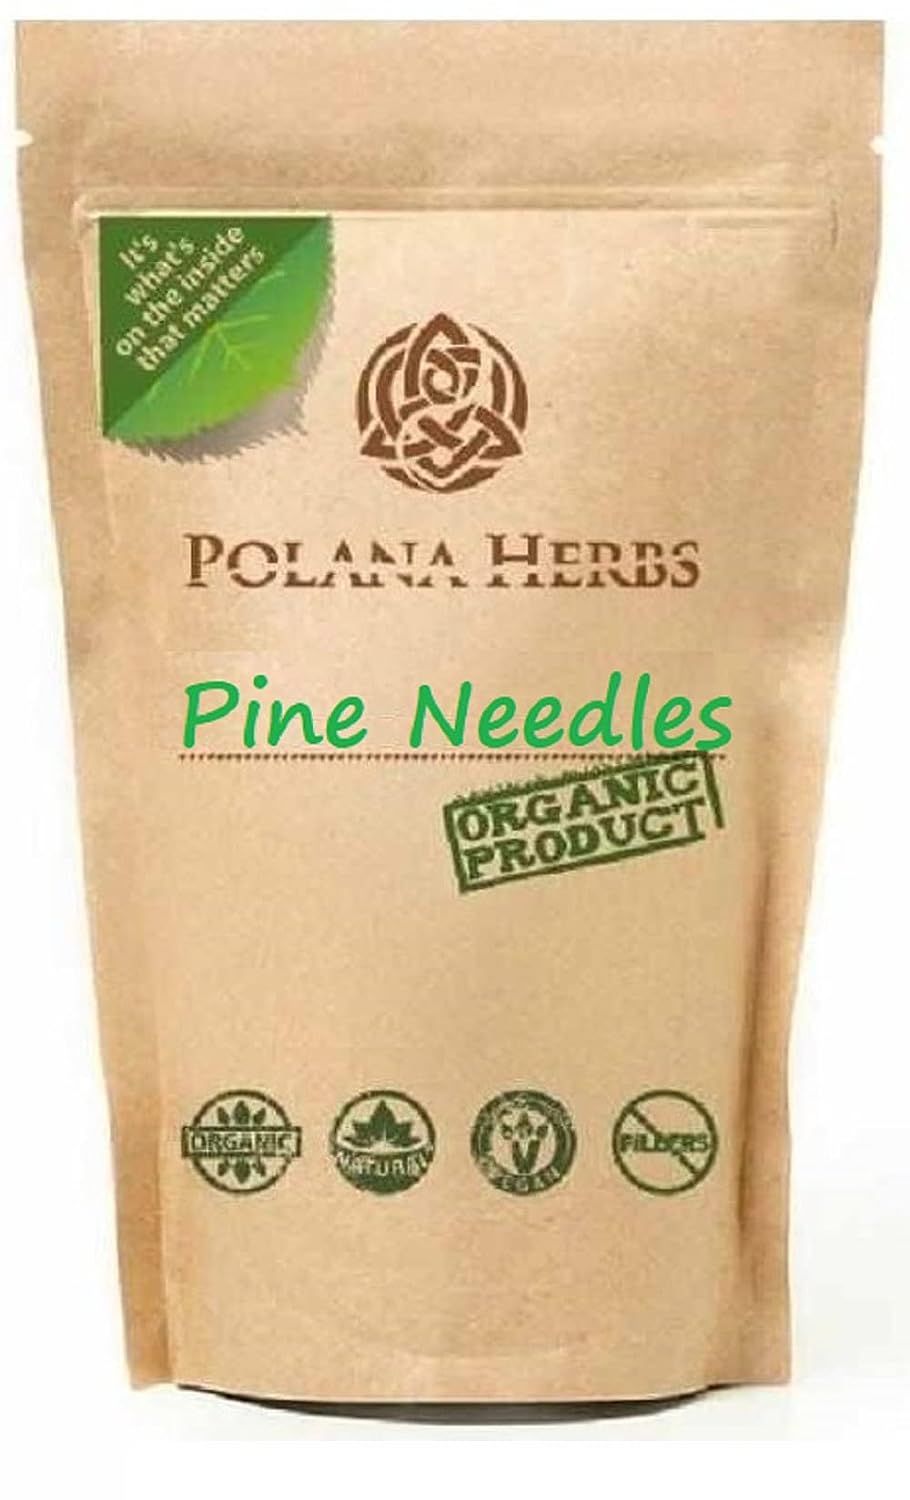 Pine Needle Tea Organic Loose Leaf (Pinus sylvestris) Help with respiratory problems, high in vitamin C and A, rich in antioxidants (- 75 servings)